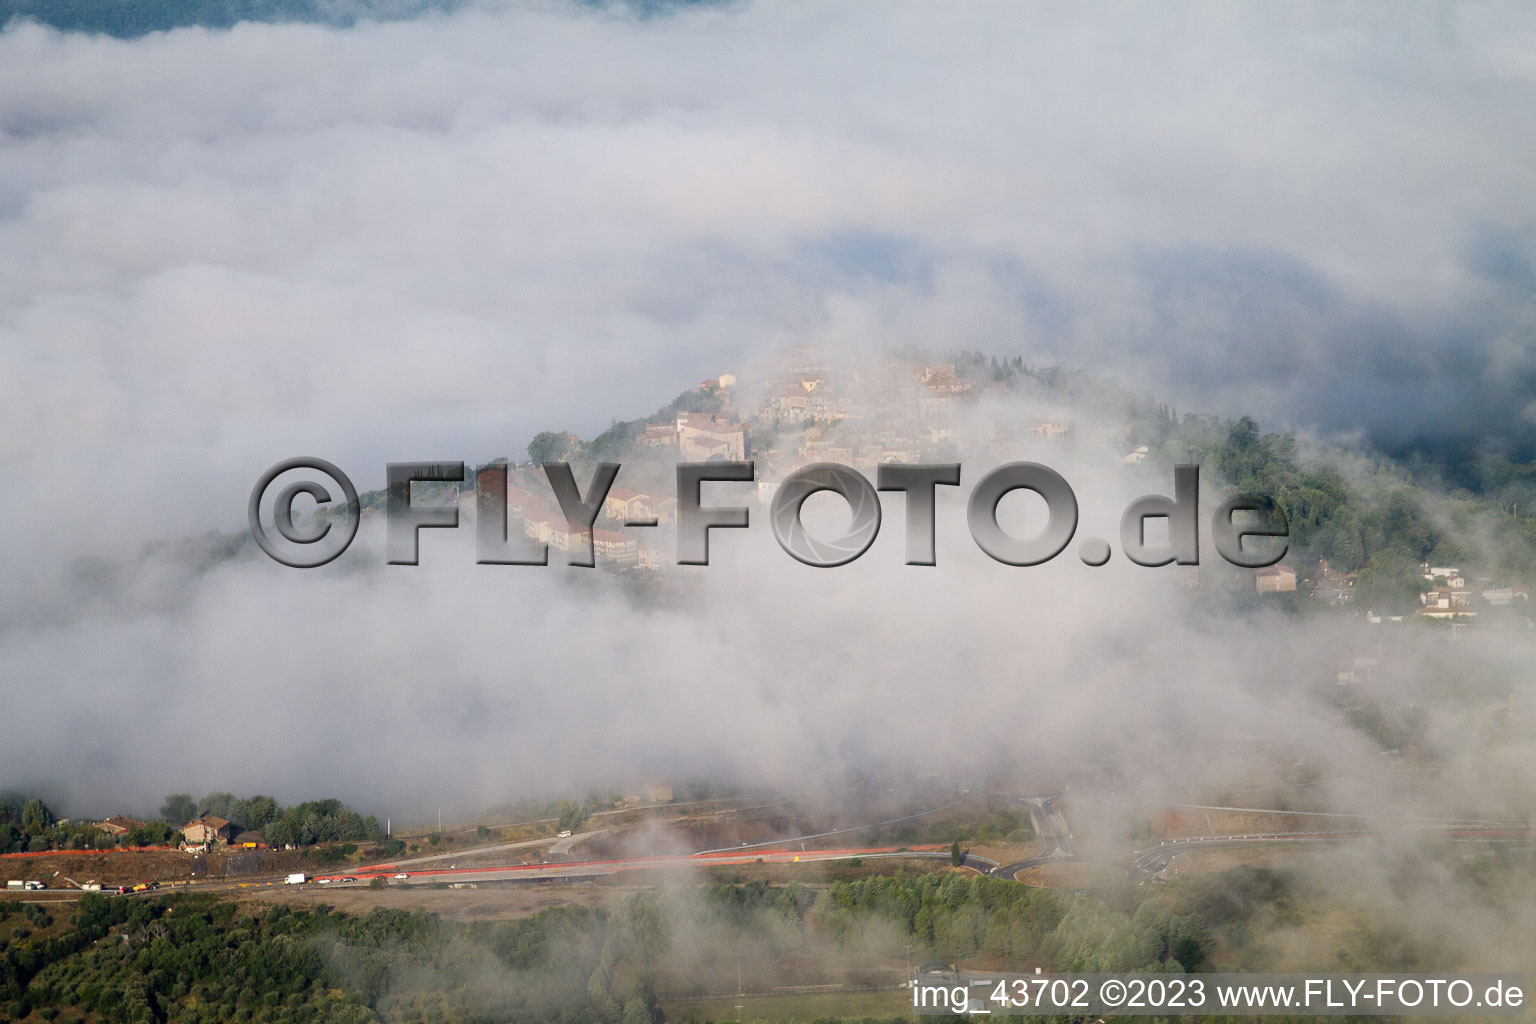 Aerial photograpy of Civitella Marittima in the state Tuscany, Italy